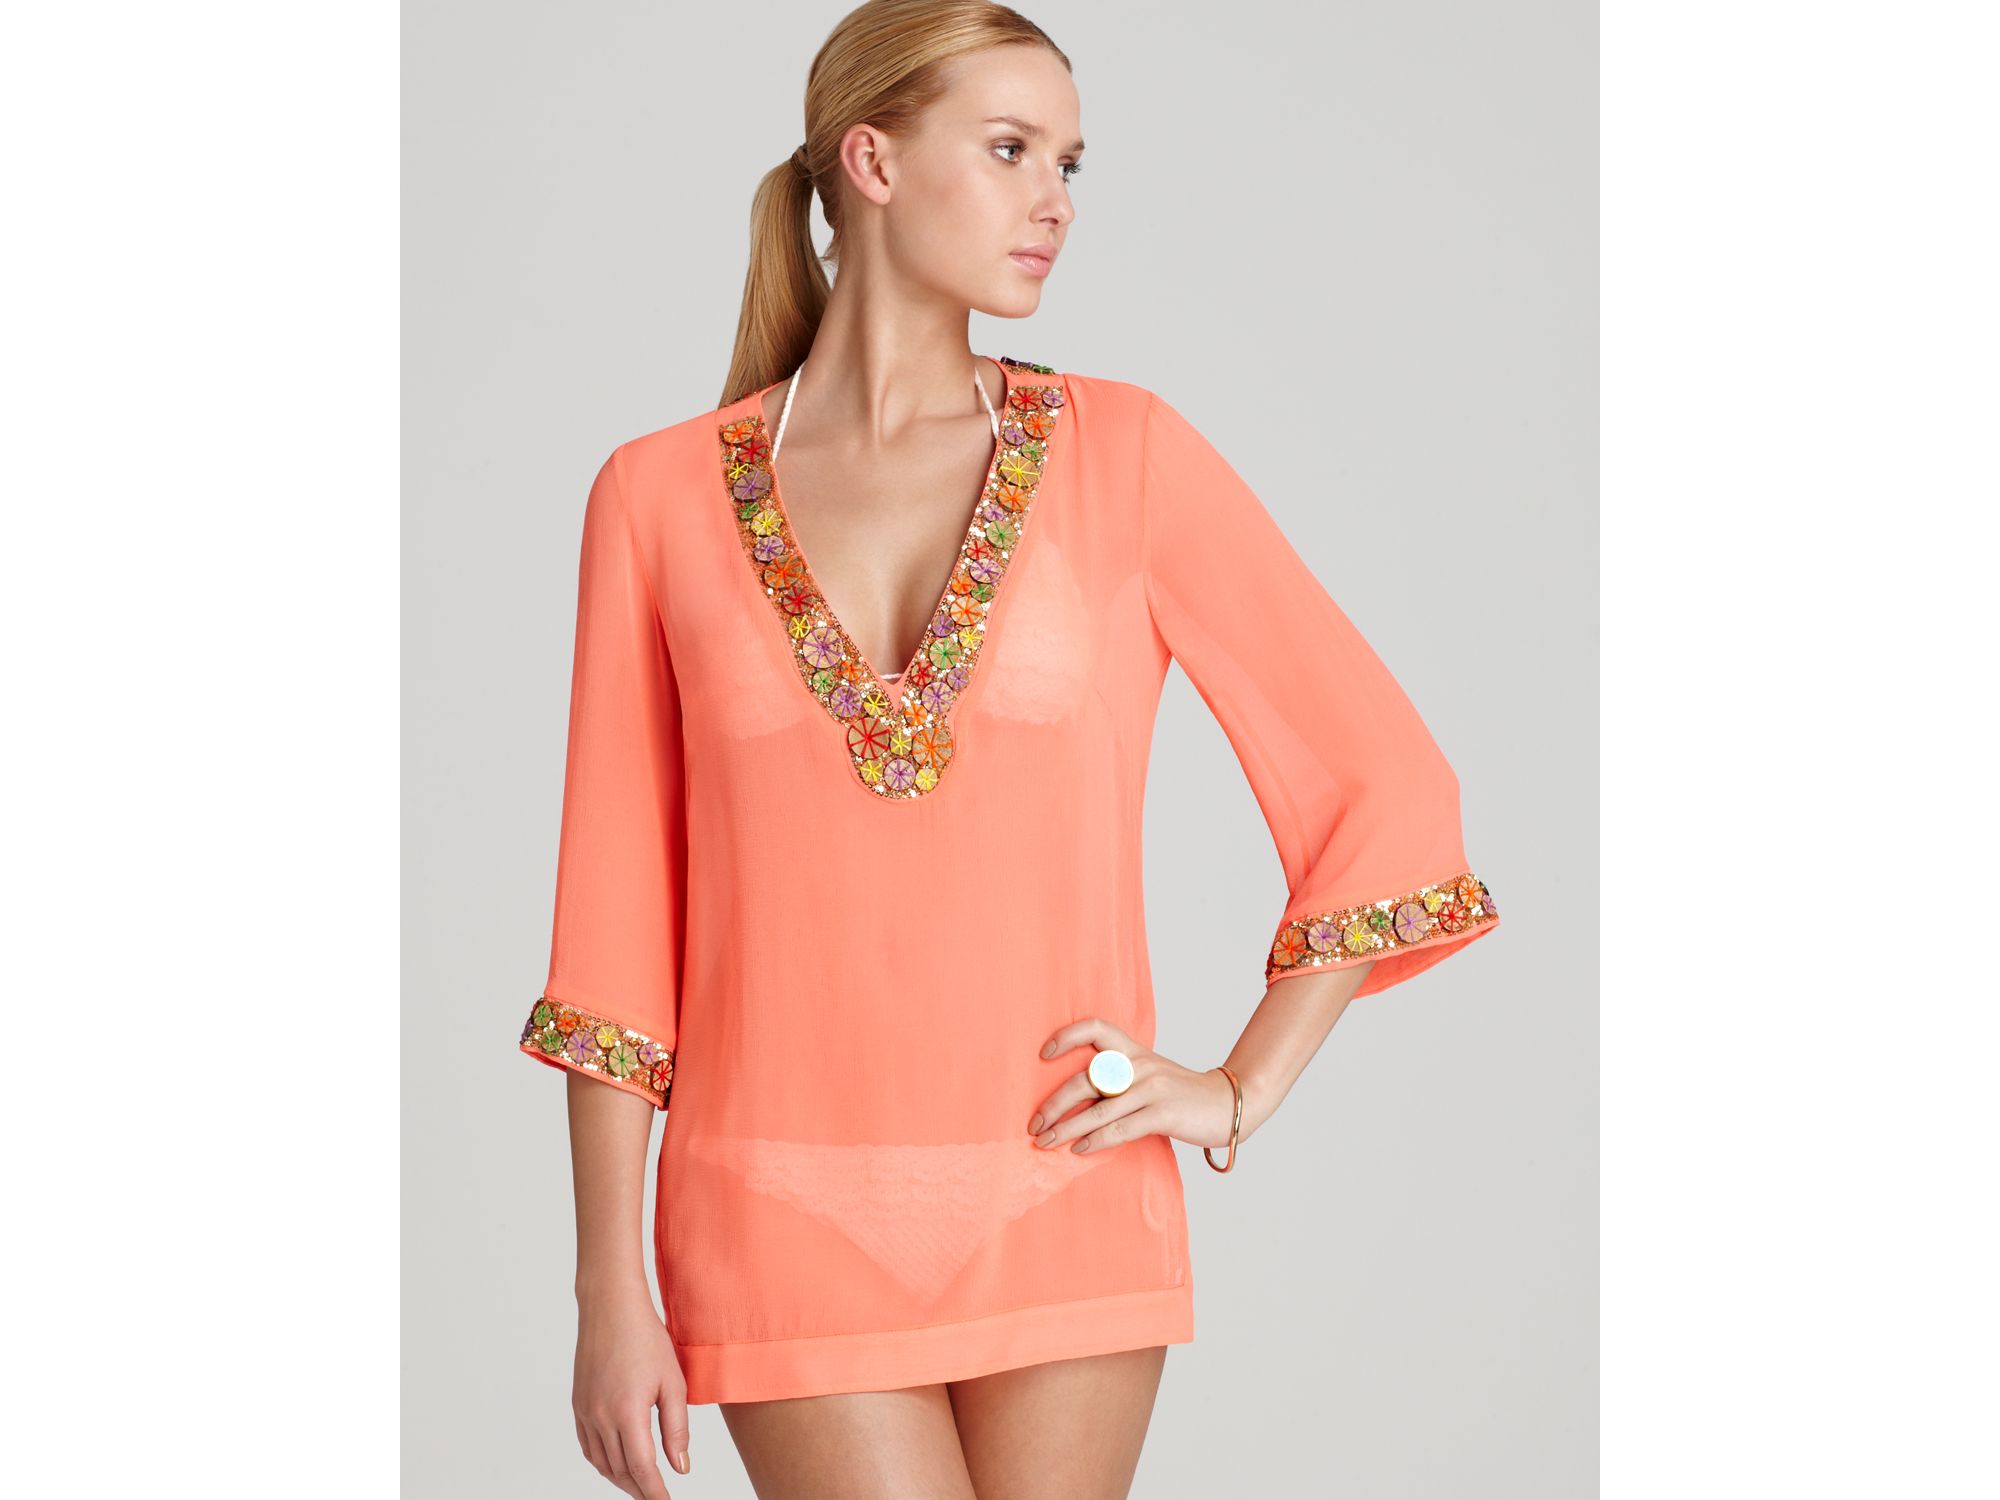 Lyst Milly Embellished Chiffon Catalina Beaded Tunic Swim Coverup in Pink